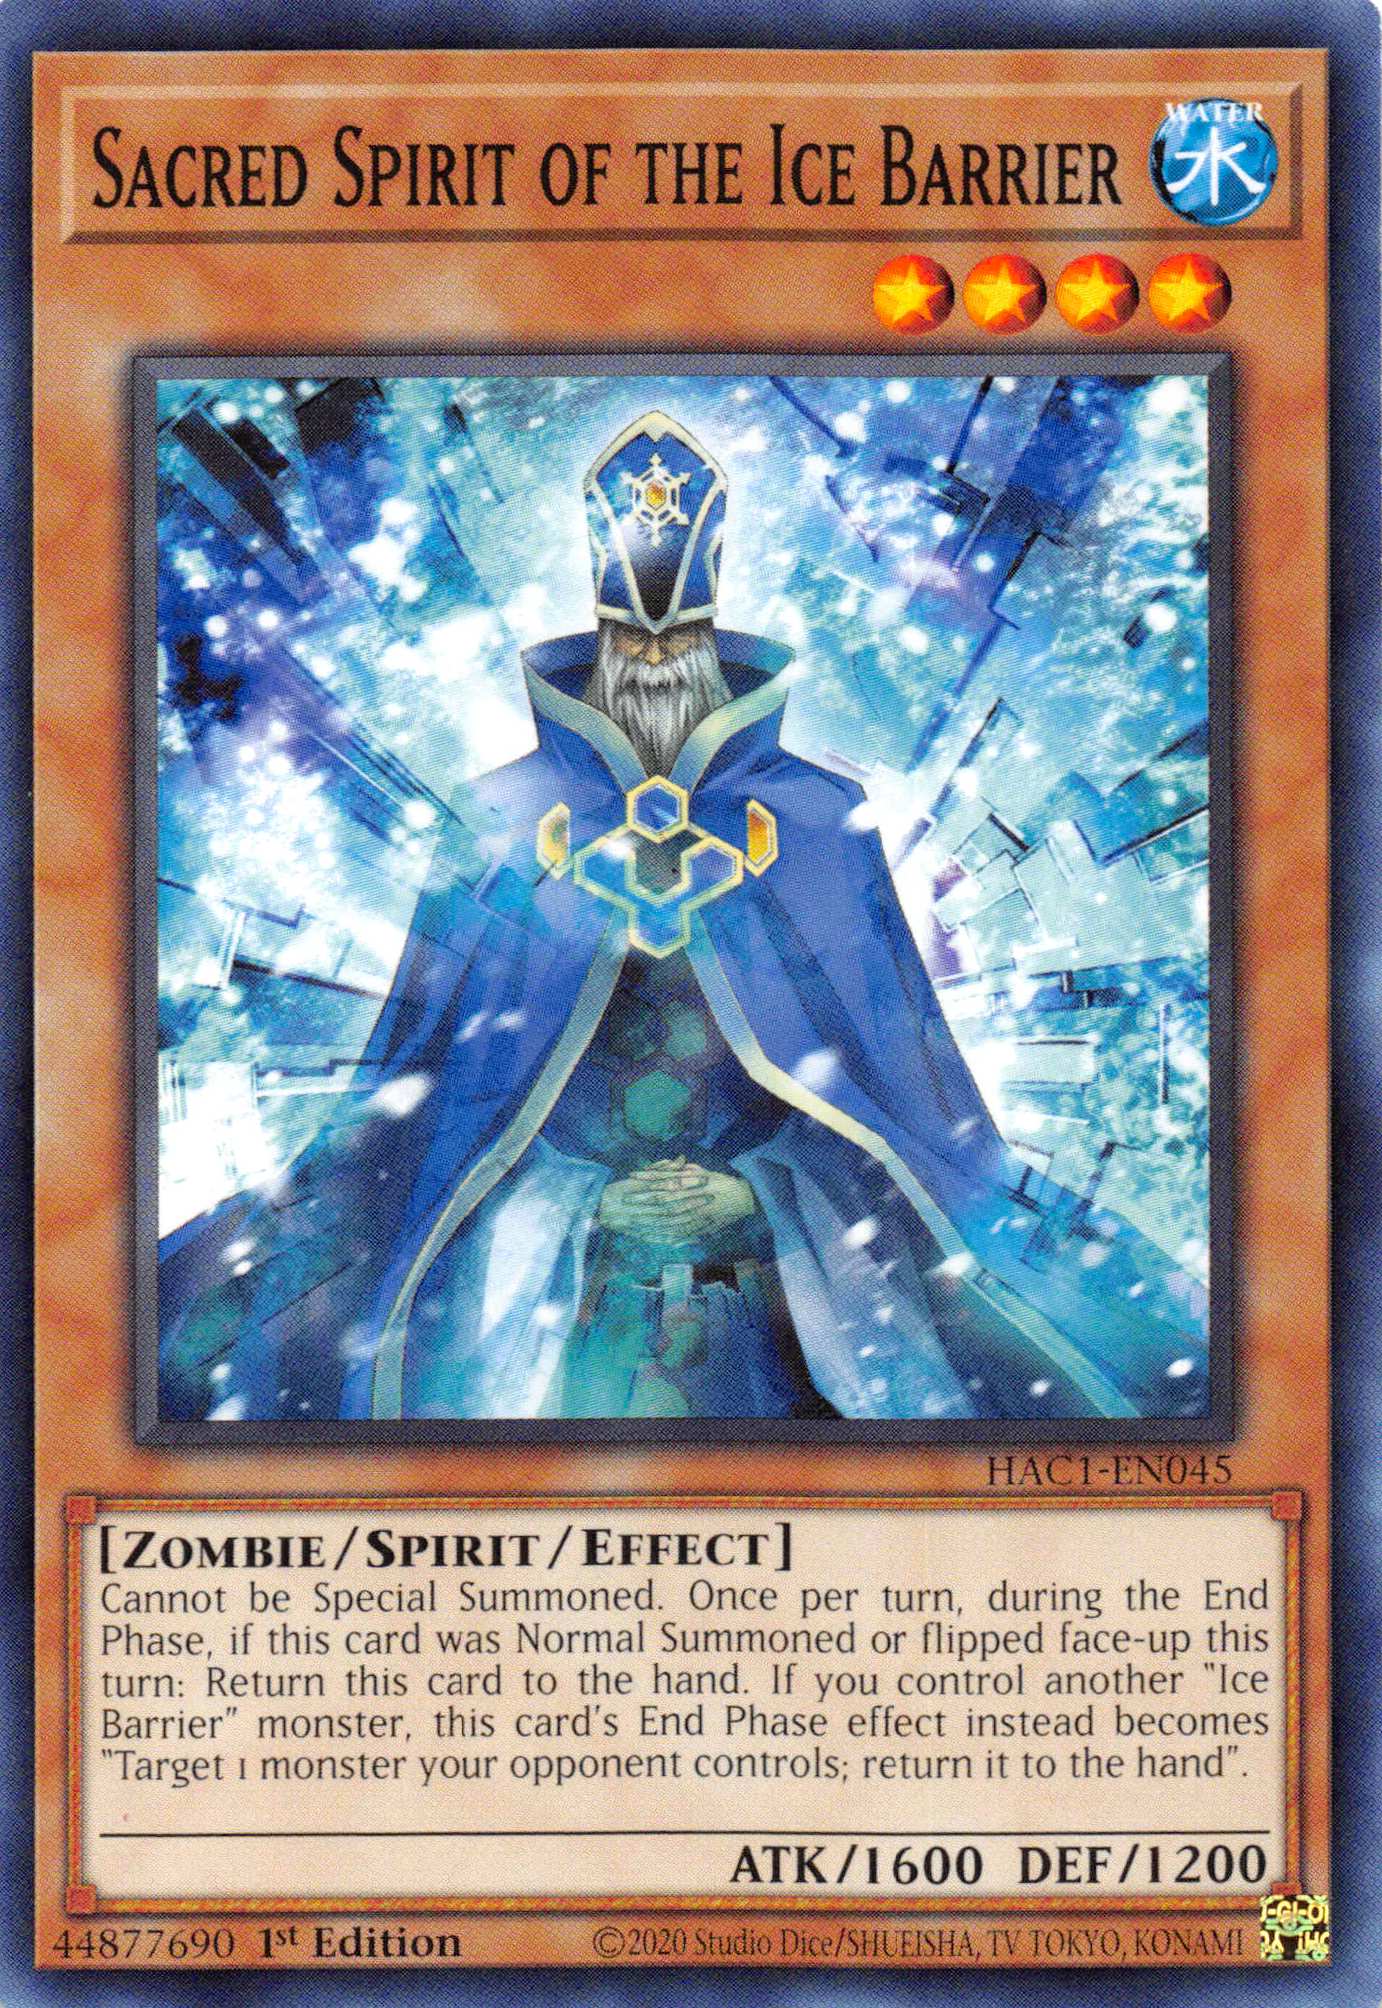 Sacred Spirit of the Ice Barrier [HAC1-EN045] Common | The CG Realm